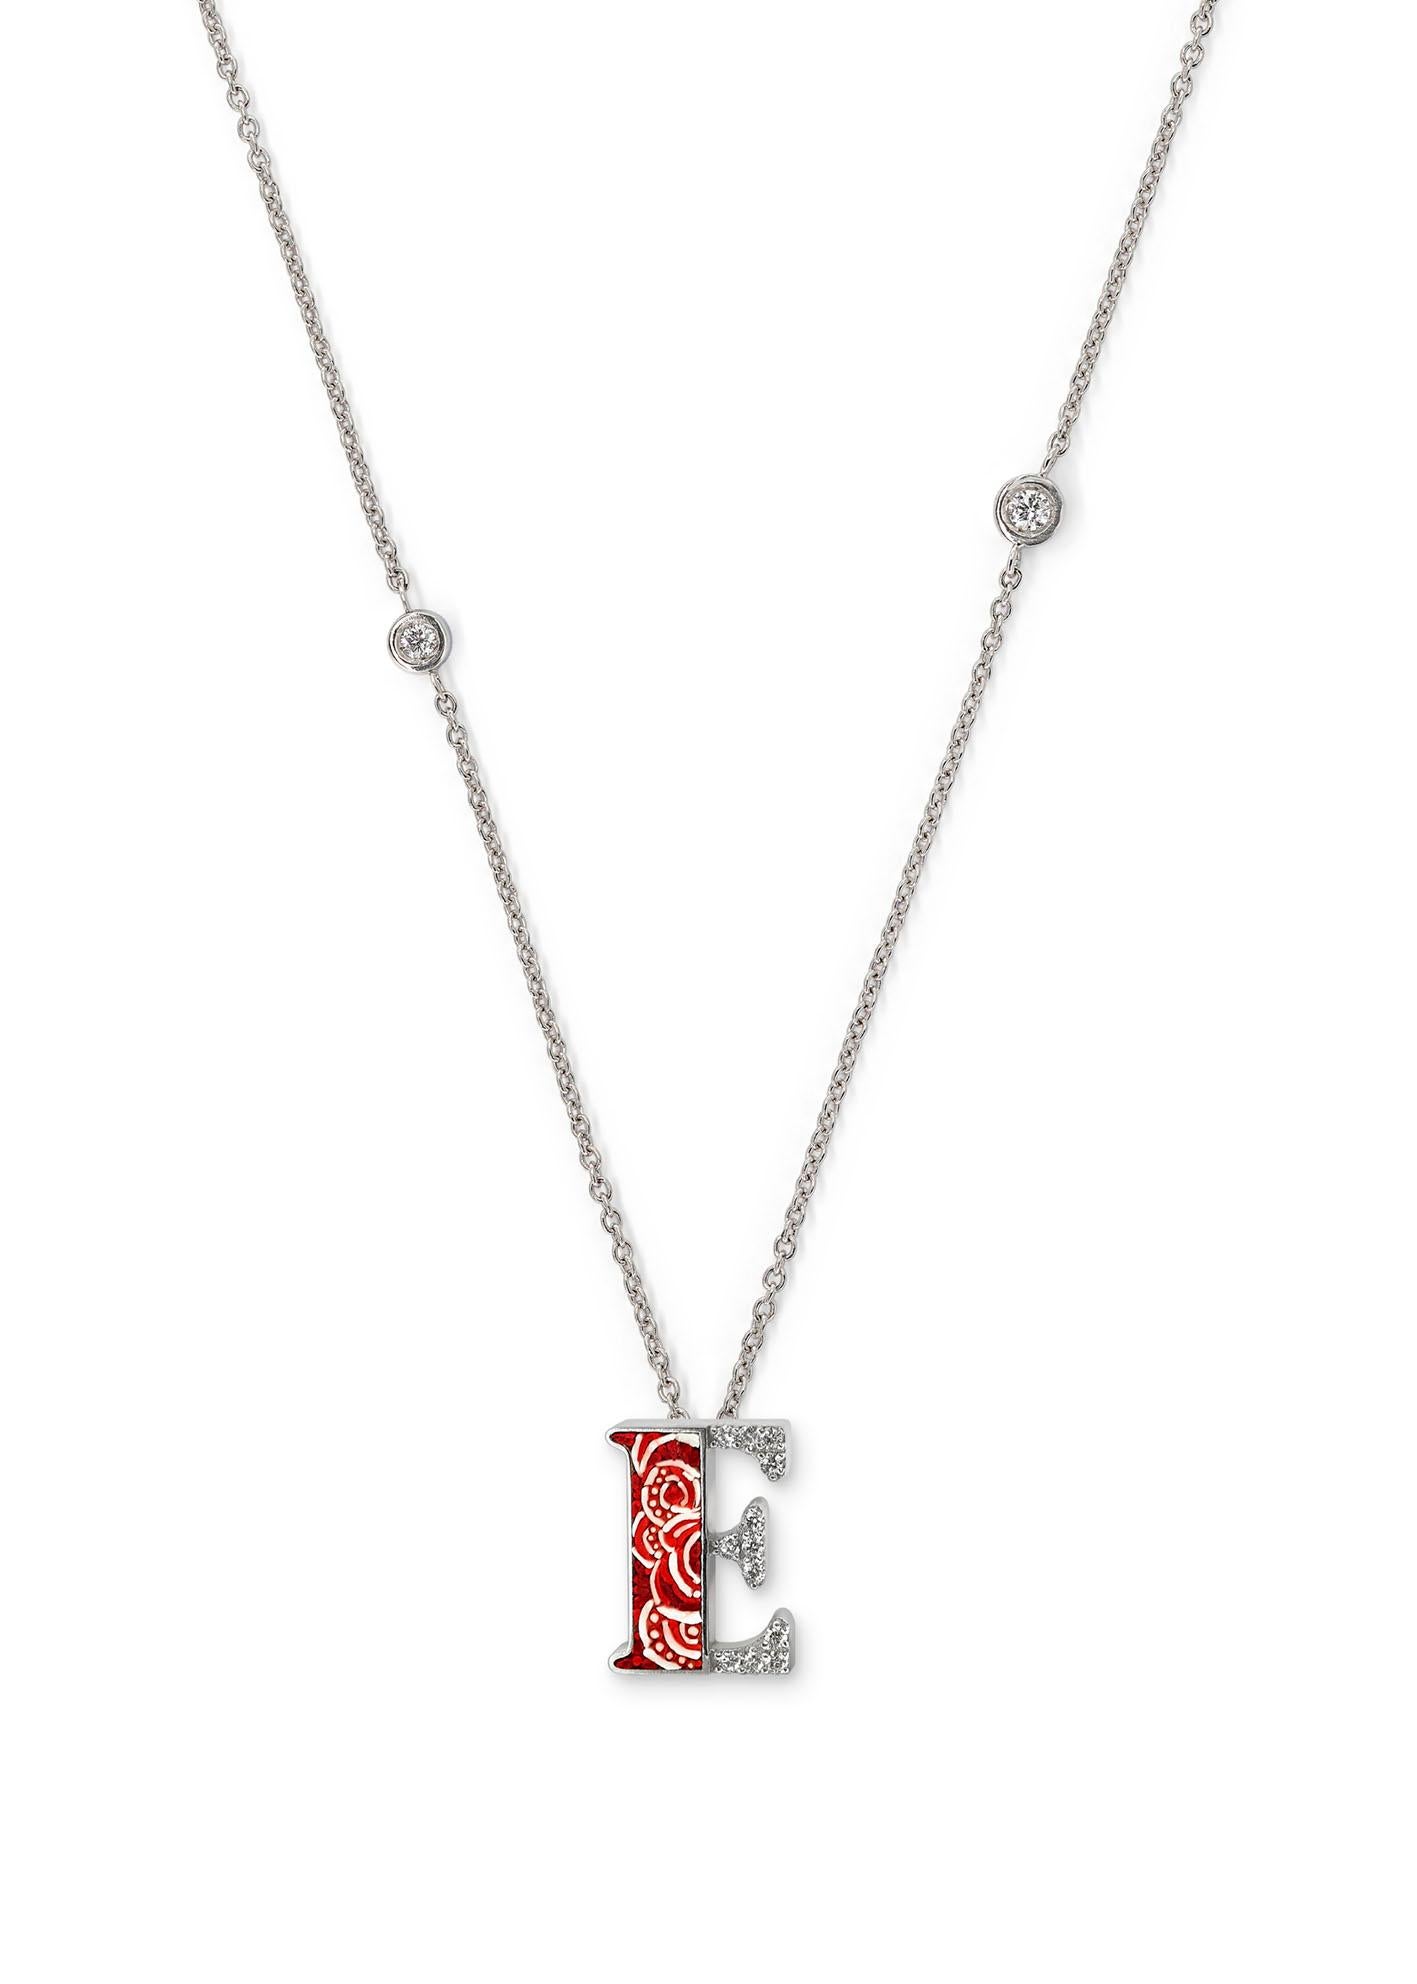 Contemporary Necklace Letter E White Gold White Diamonds Hand Decorated with Micromosaic For Sale